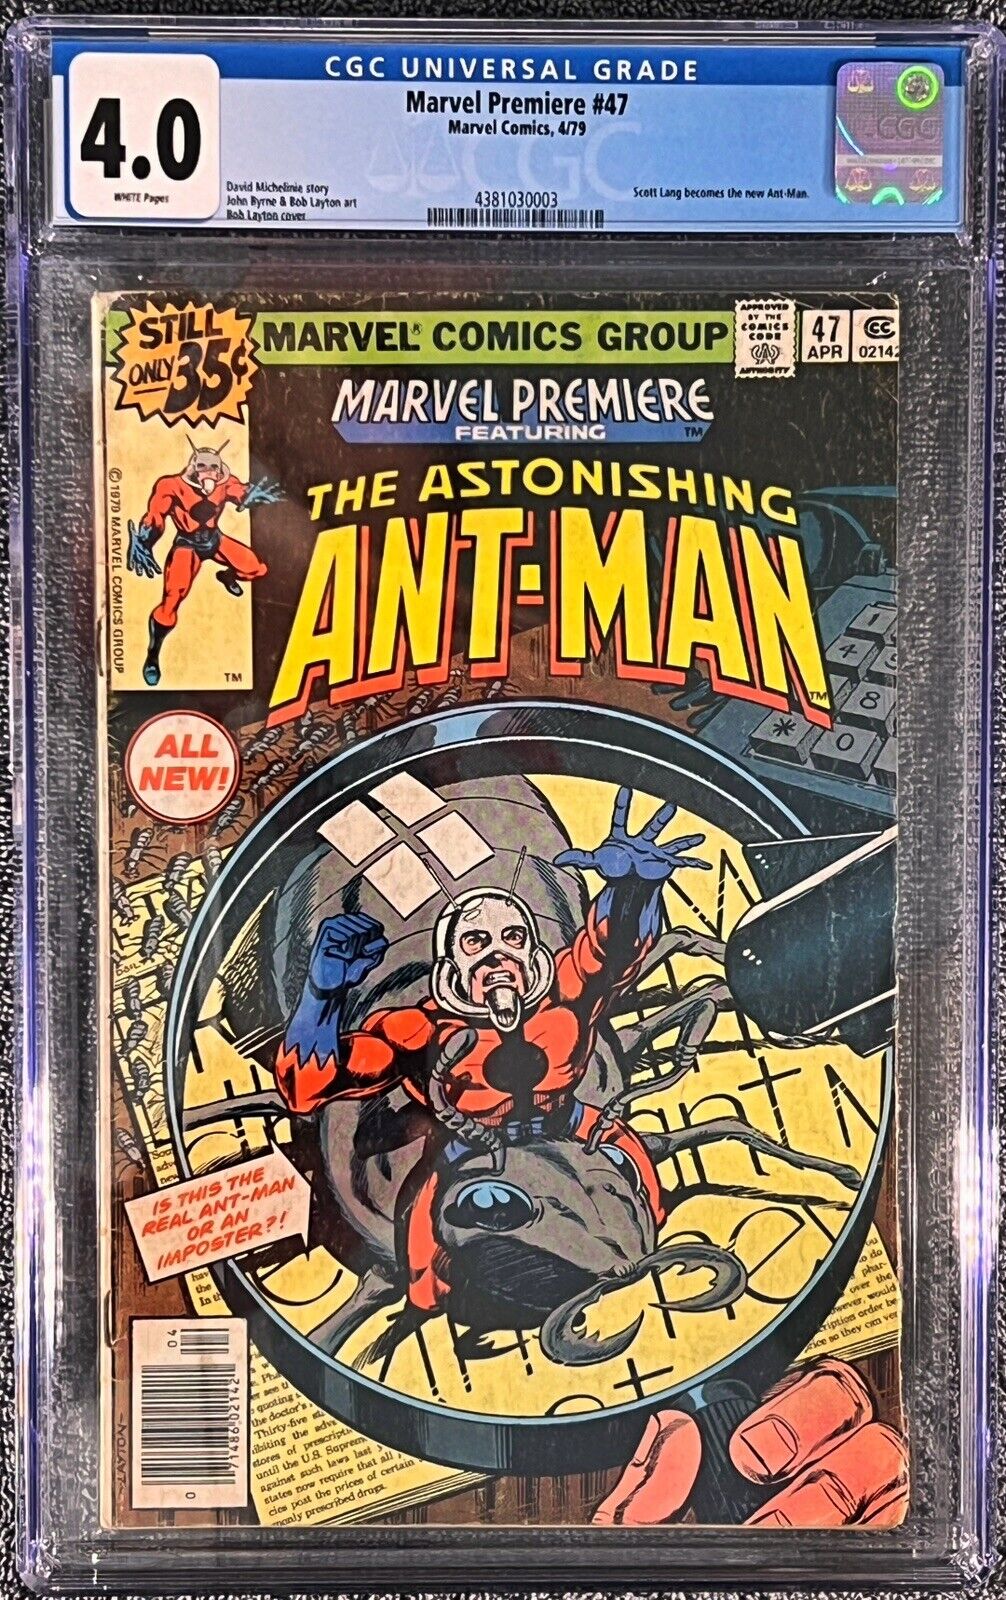 Marvel Premiere #47 (CGC 4.0 1979) *1st Scott Lang as Ant Man* 🔥KEY ISSUE🔥